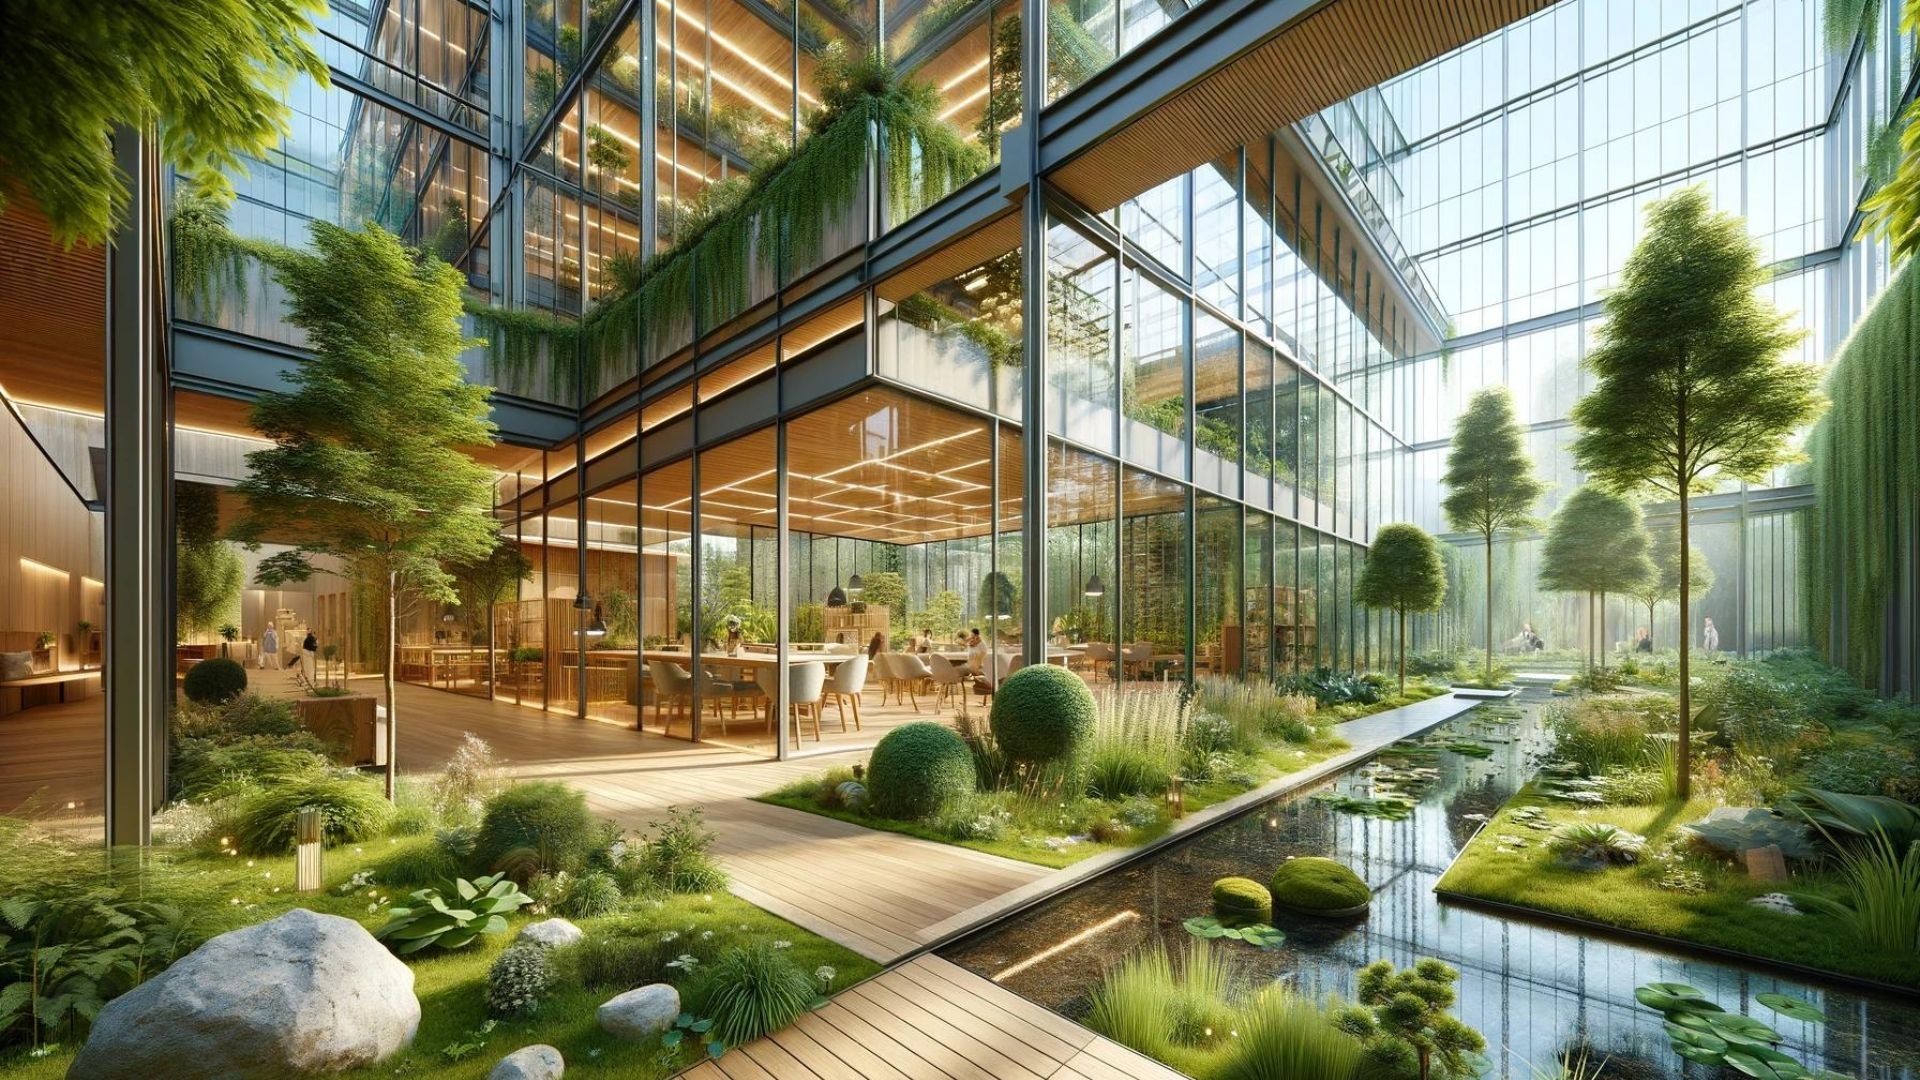 Biophilic building design aims to bring people and nature closer together. Find out how glass plays 